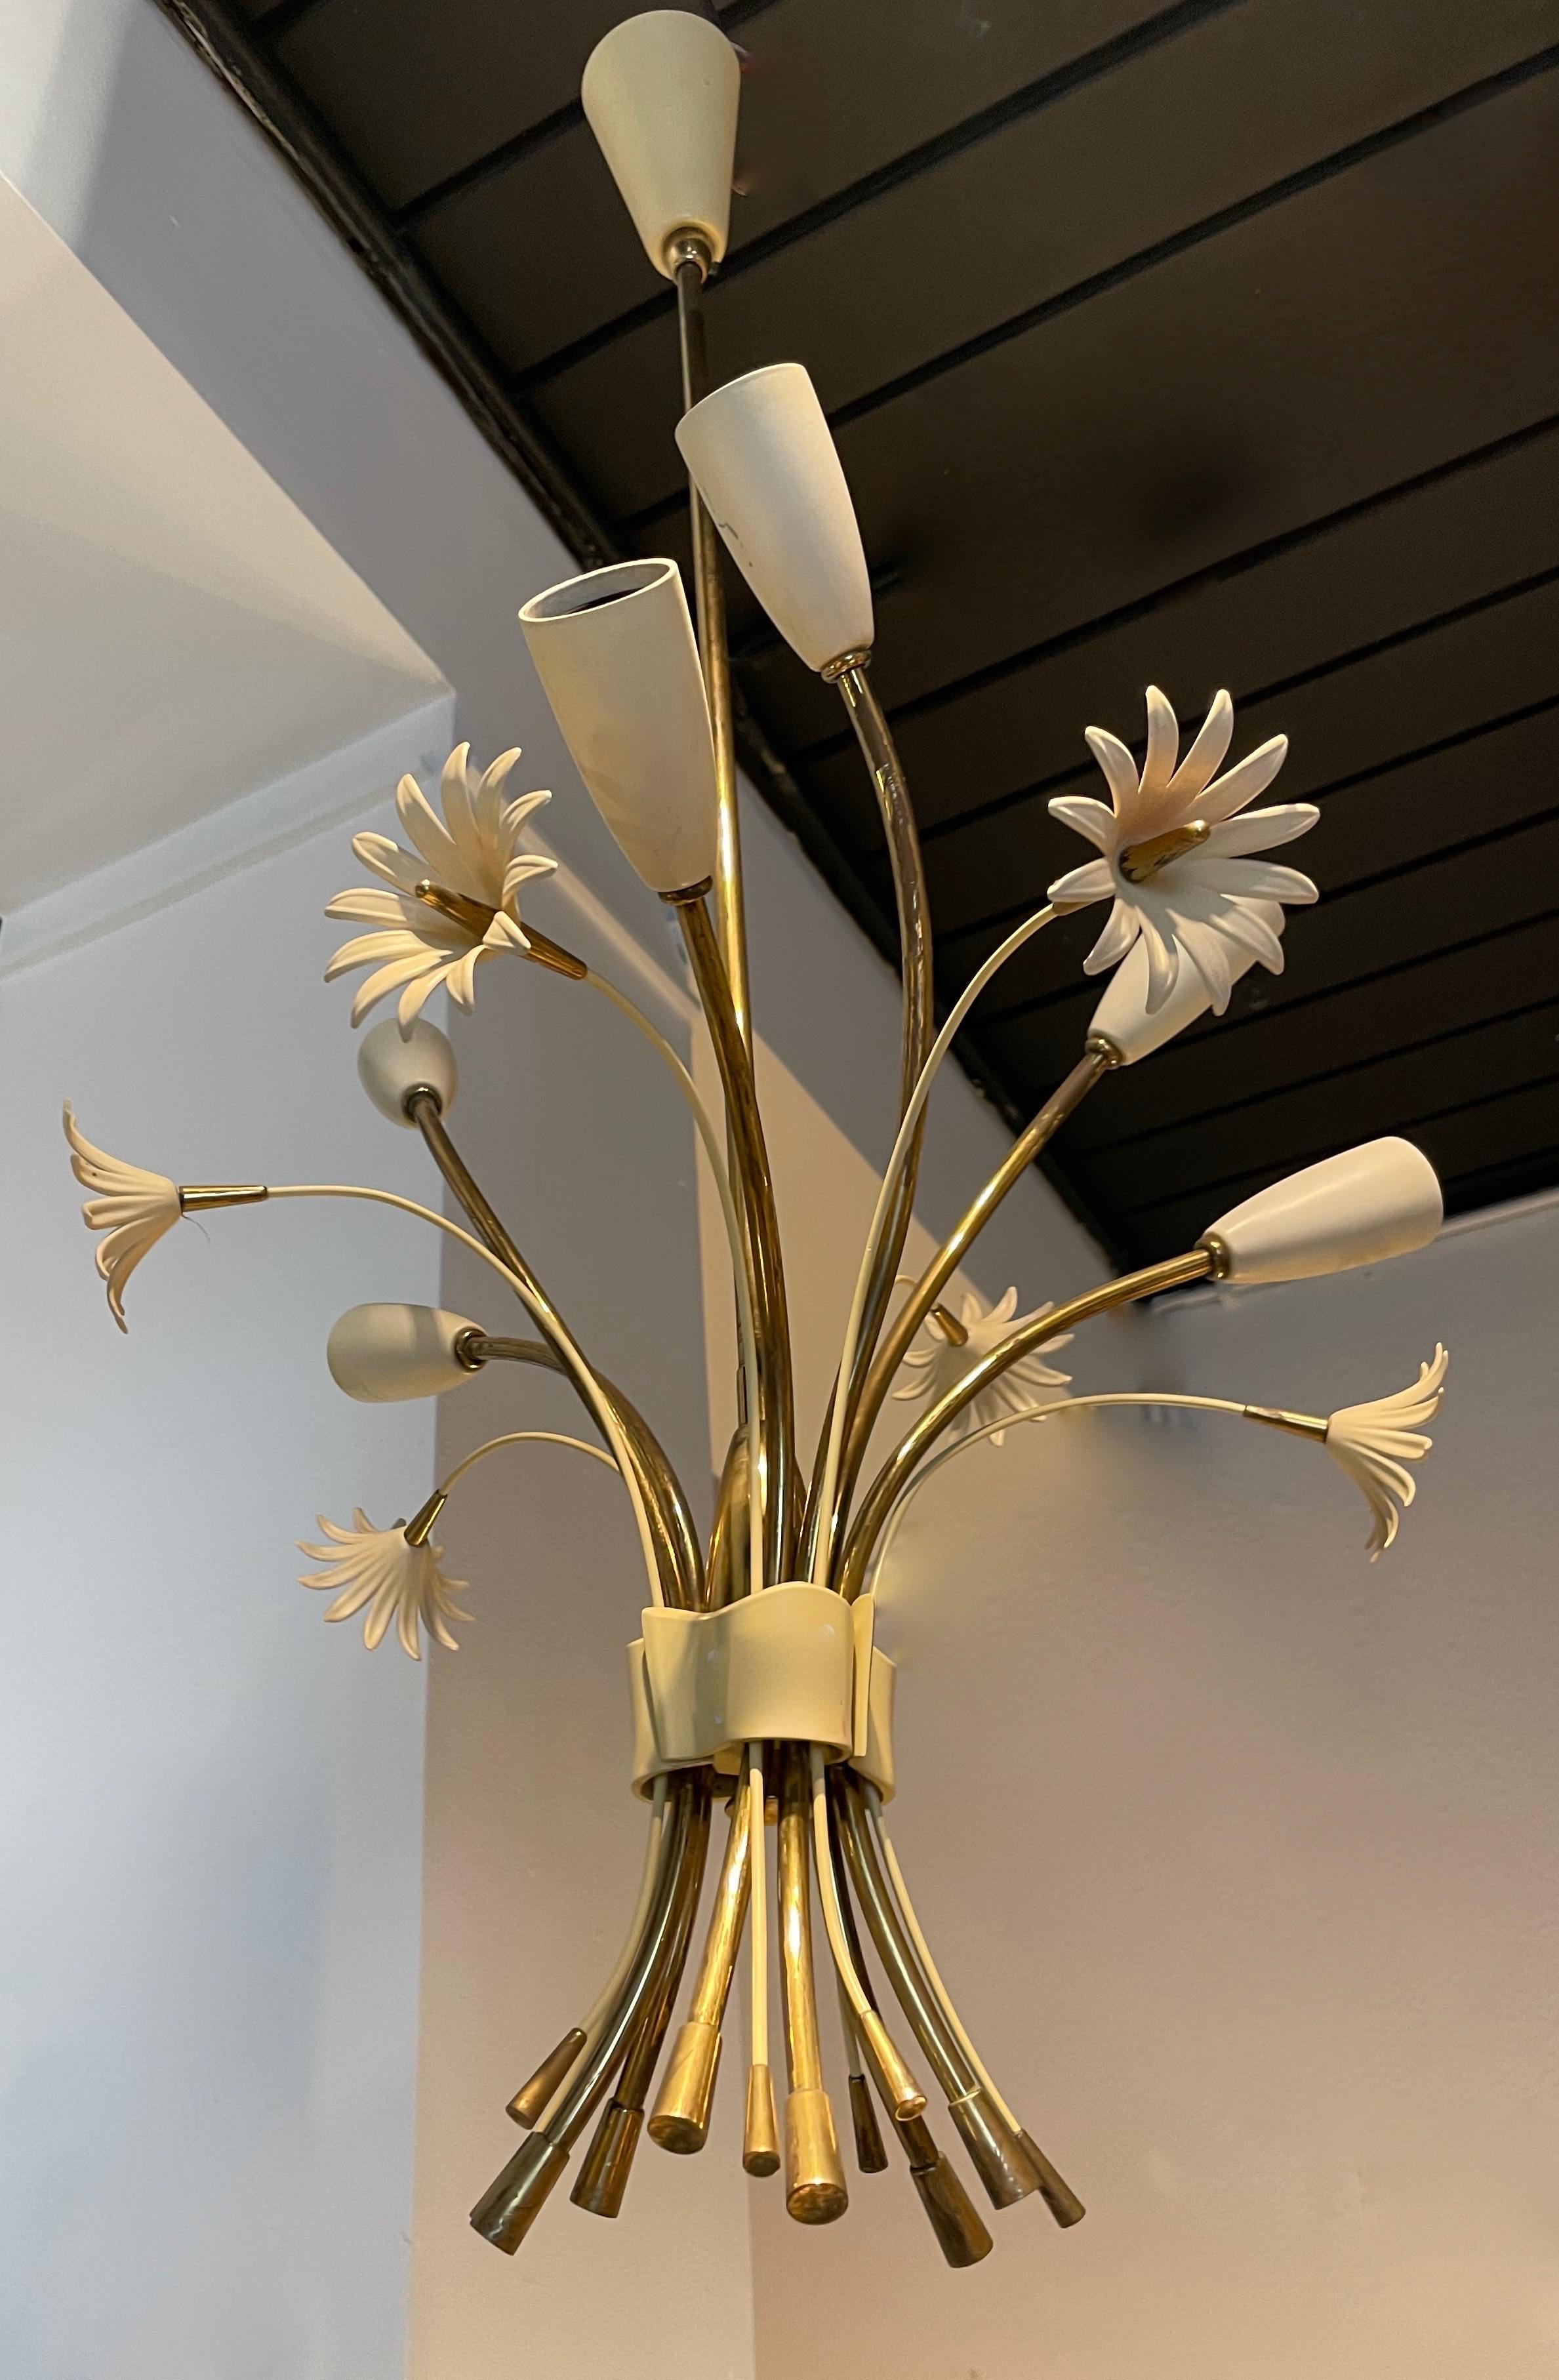 Charming chandelier designed by Angelo Lelli for Arredolucce.
Six ligths.
Around 1950-Italy.